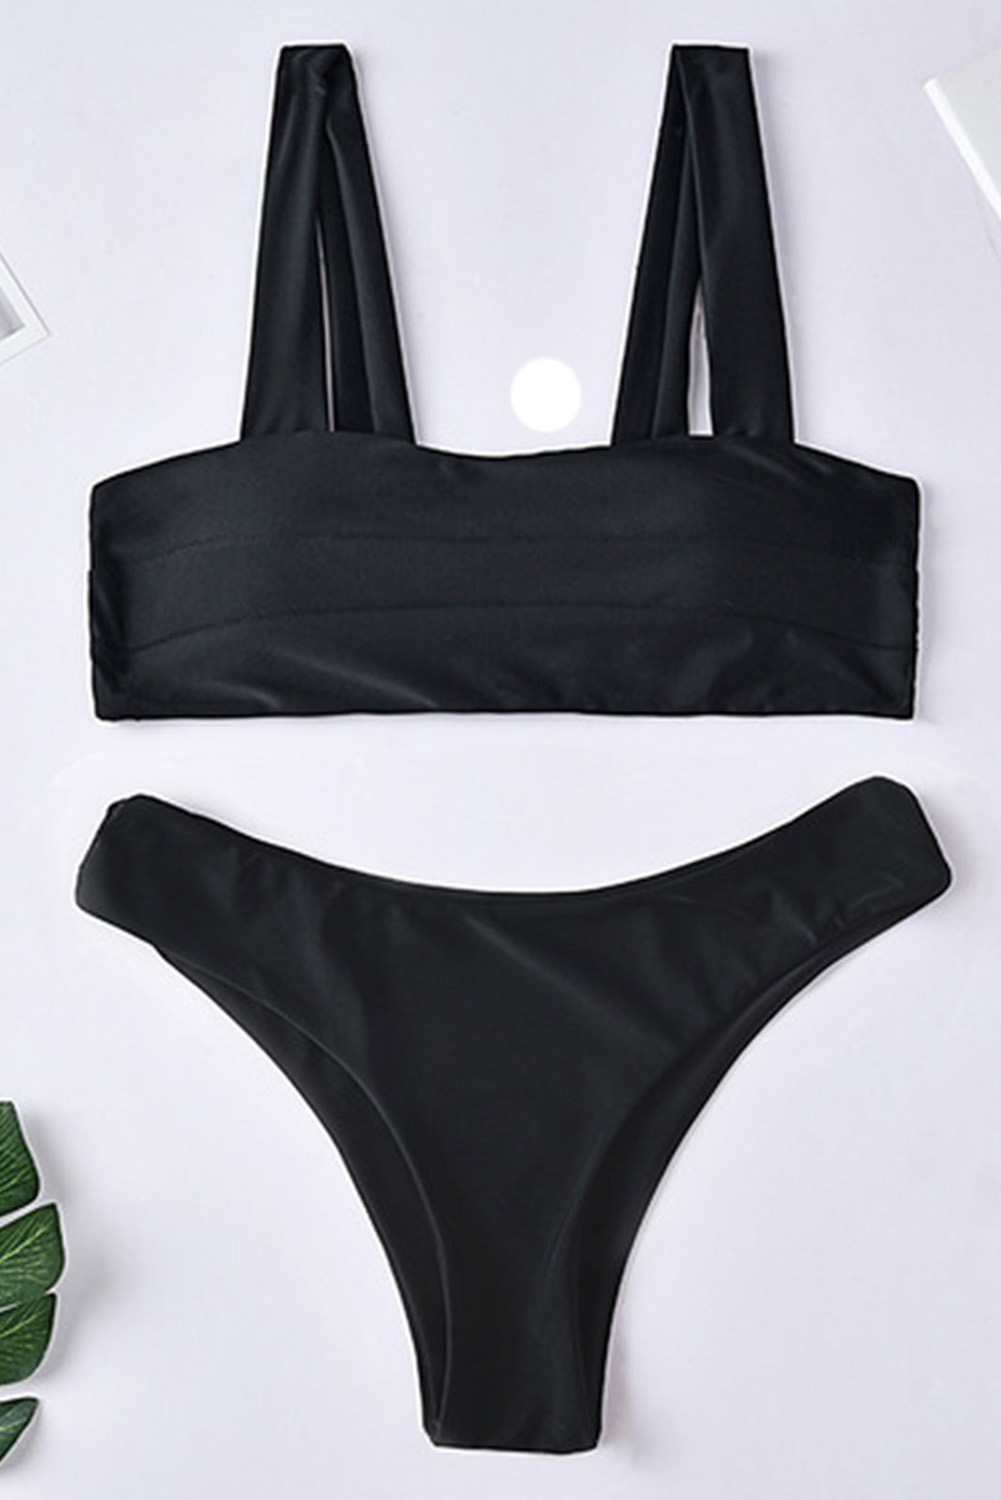 Wholesale Other Category, Cheap Black Wide Straps Padded Bandeau High ...